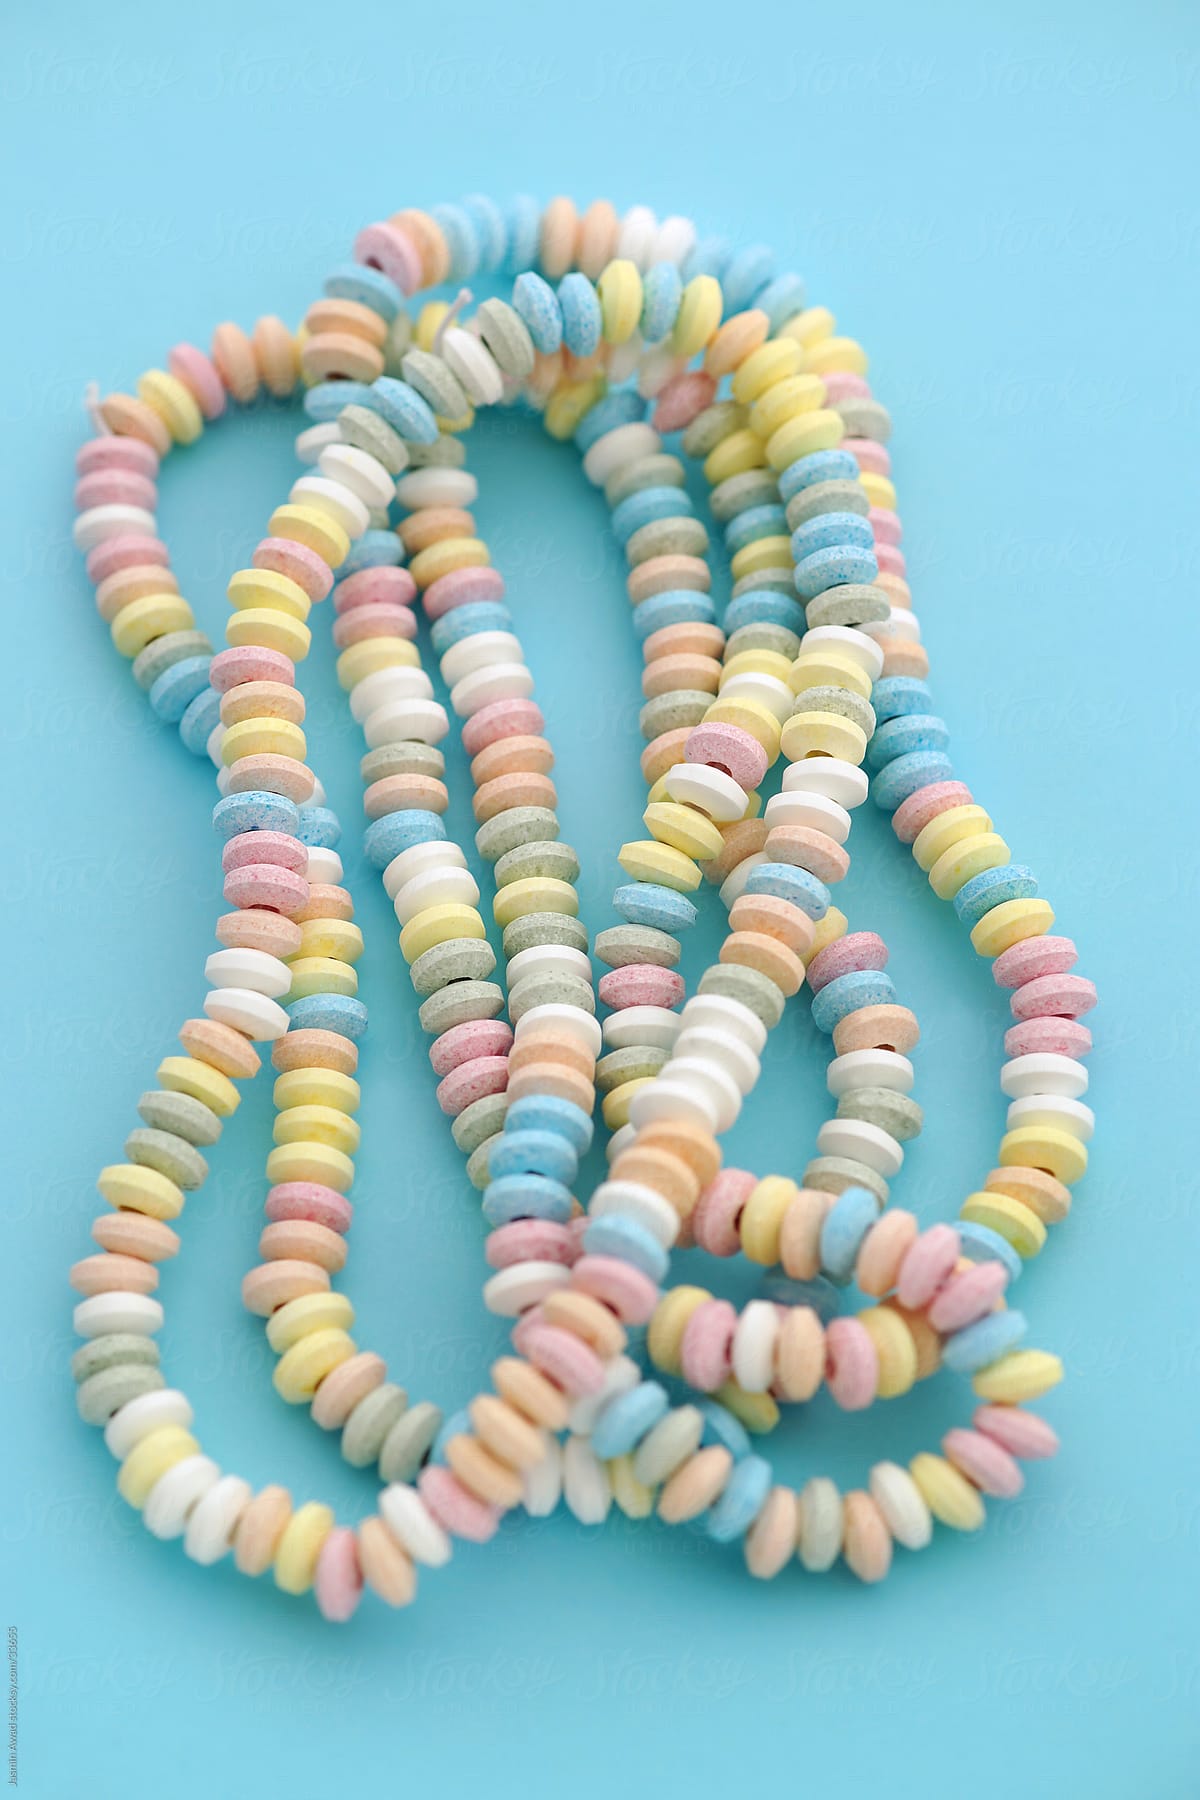 Candy Jewelry In Pastel Colors On Blue Background by Stocksy